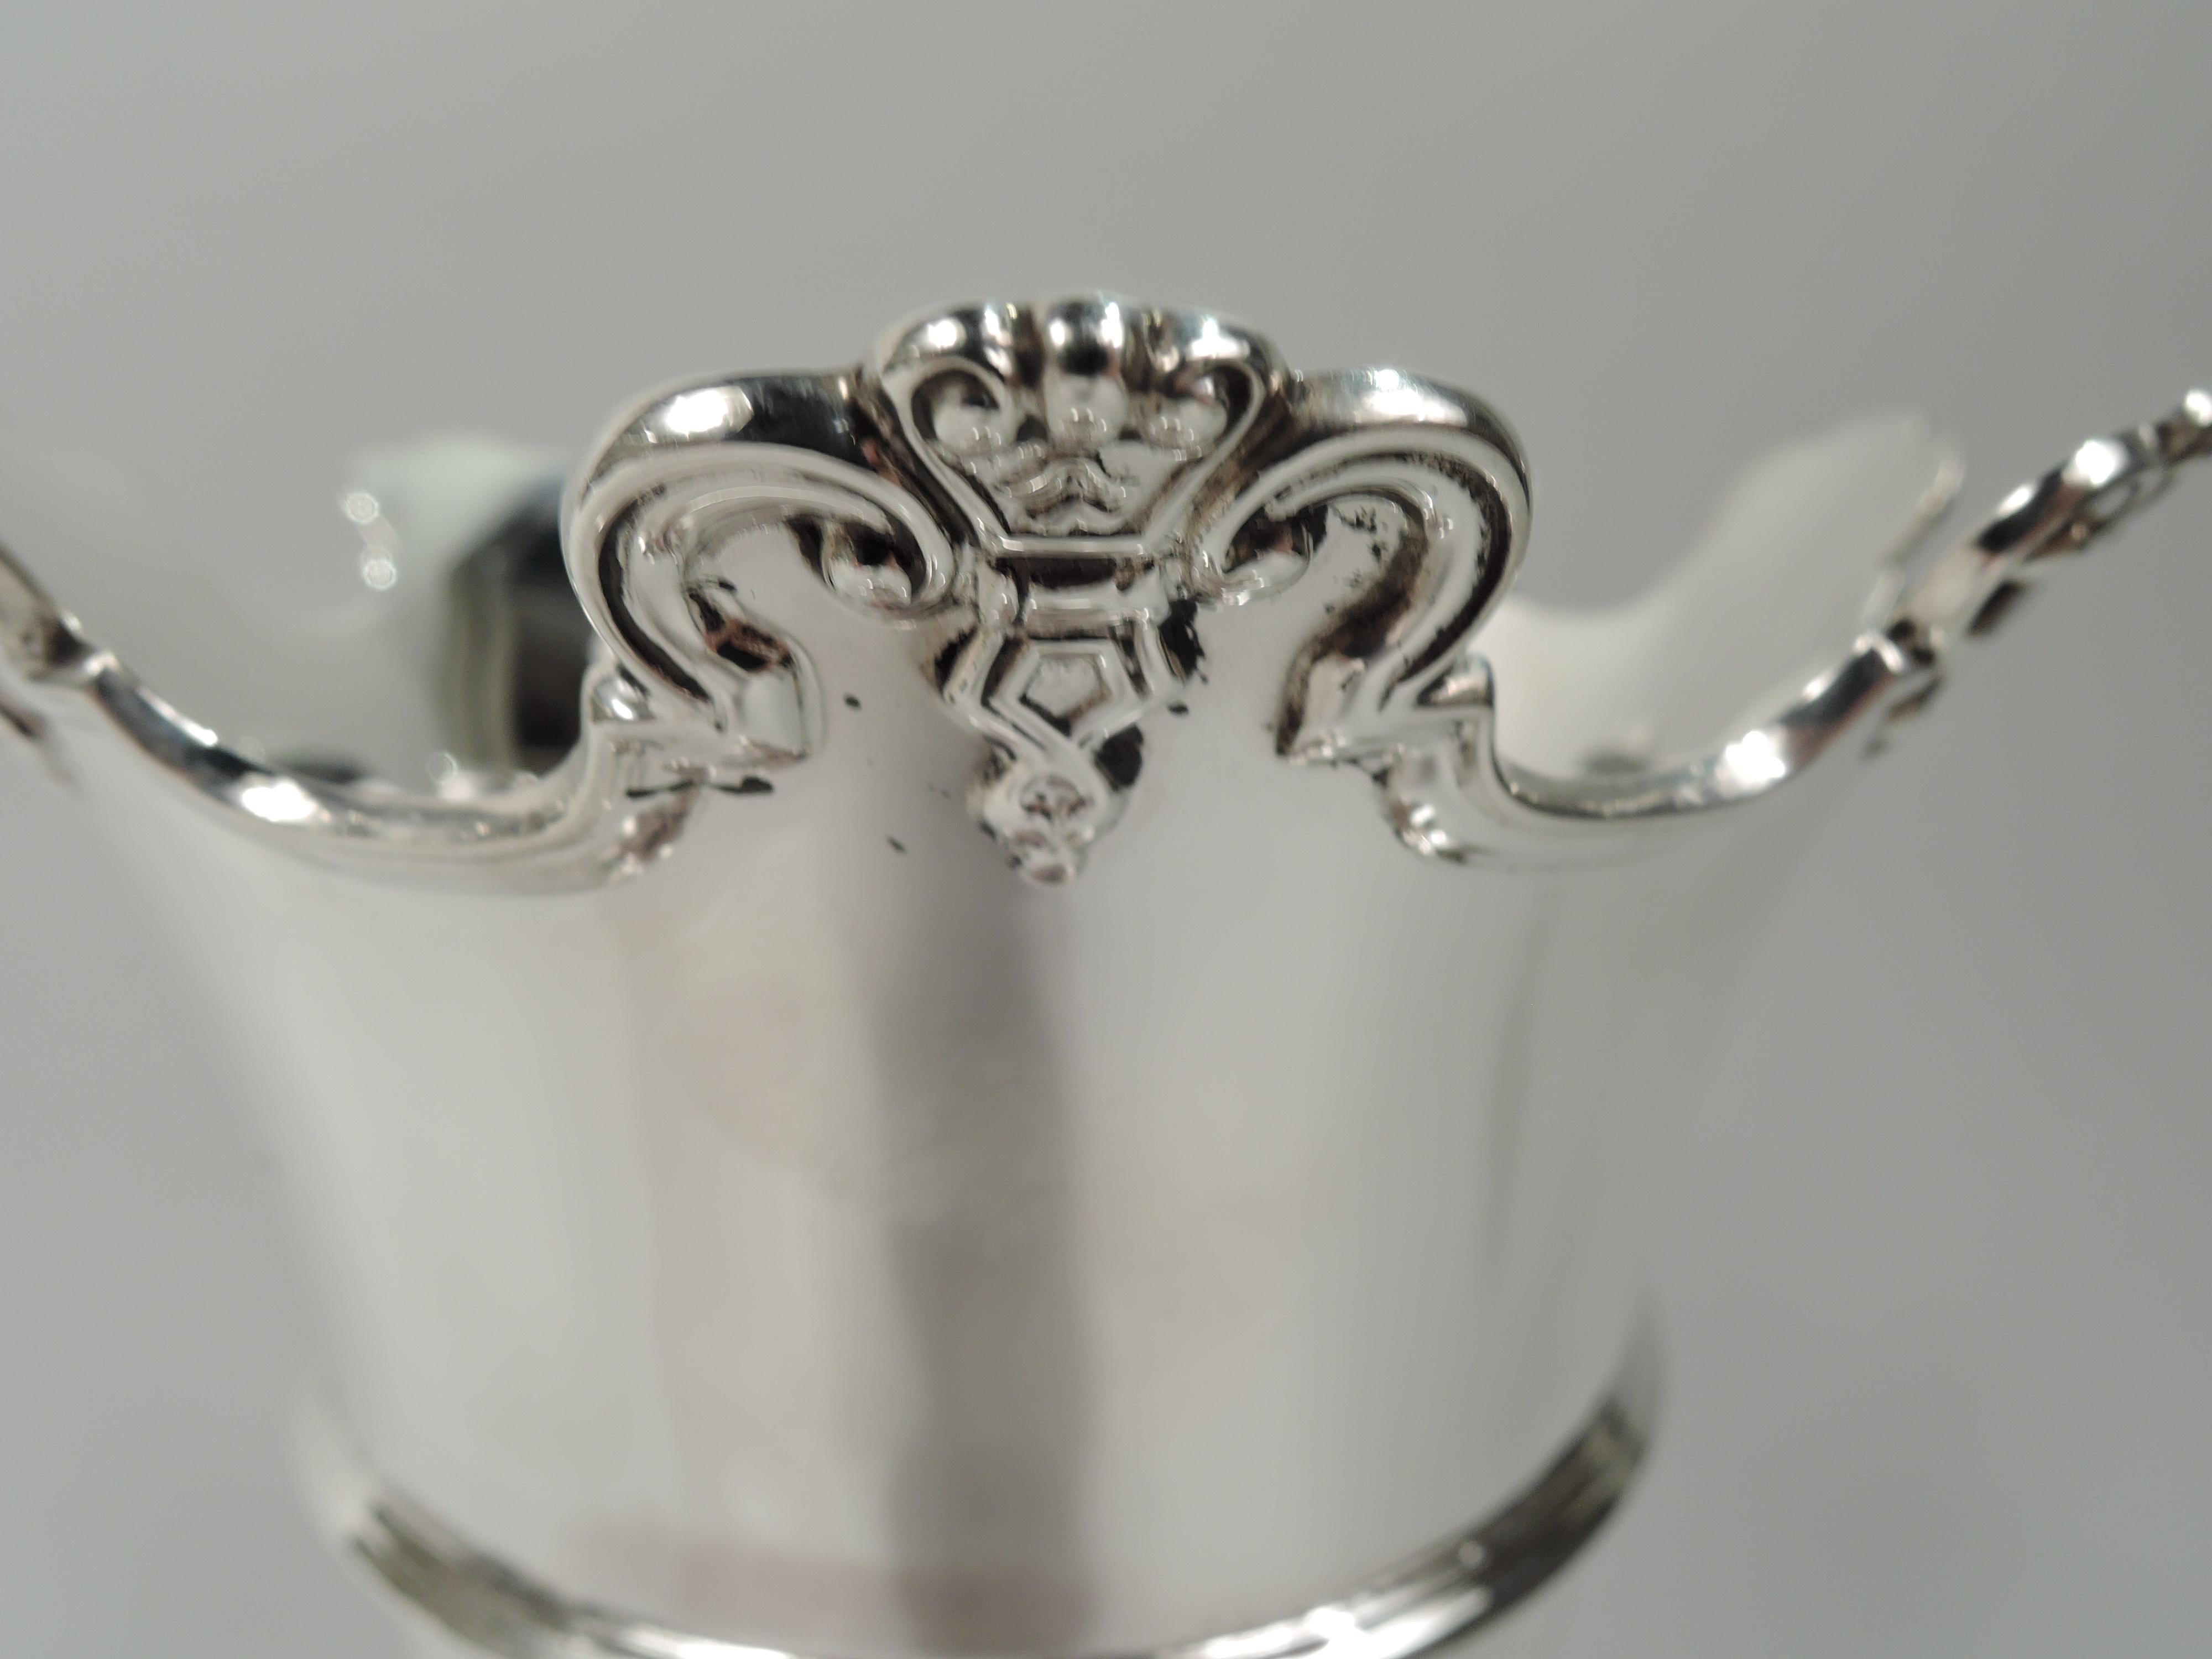 Neoclassical Revival Antique English Edwardian Neoclassical Sterling Silver Vase For Sale